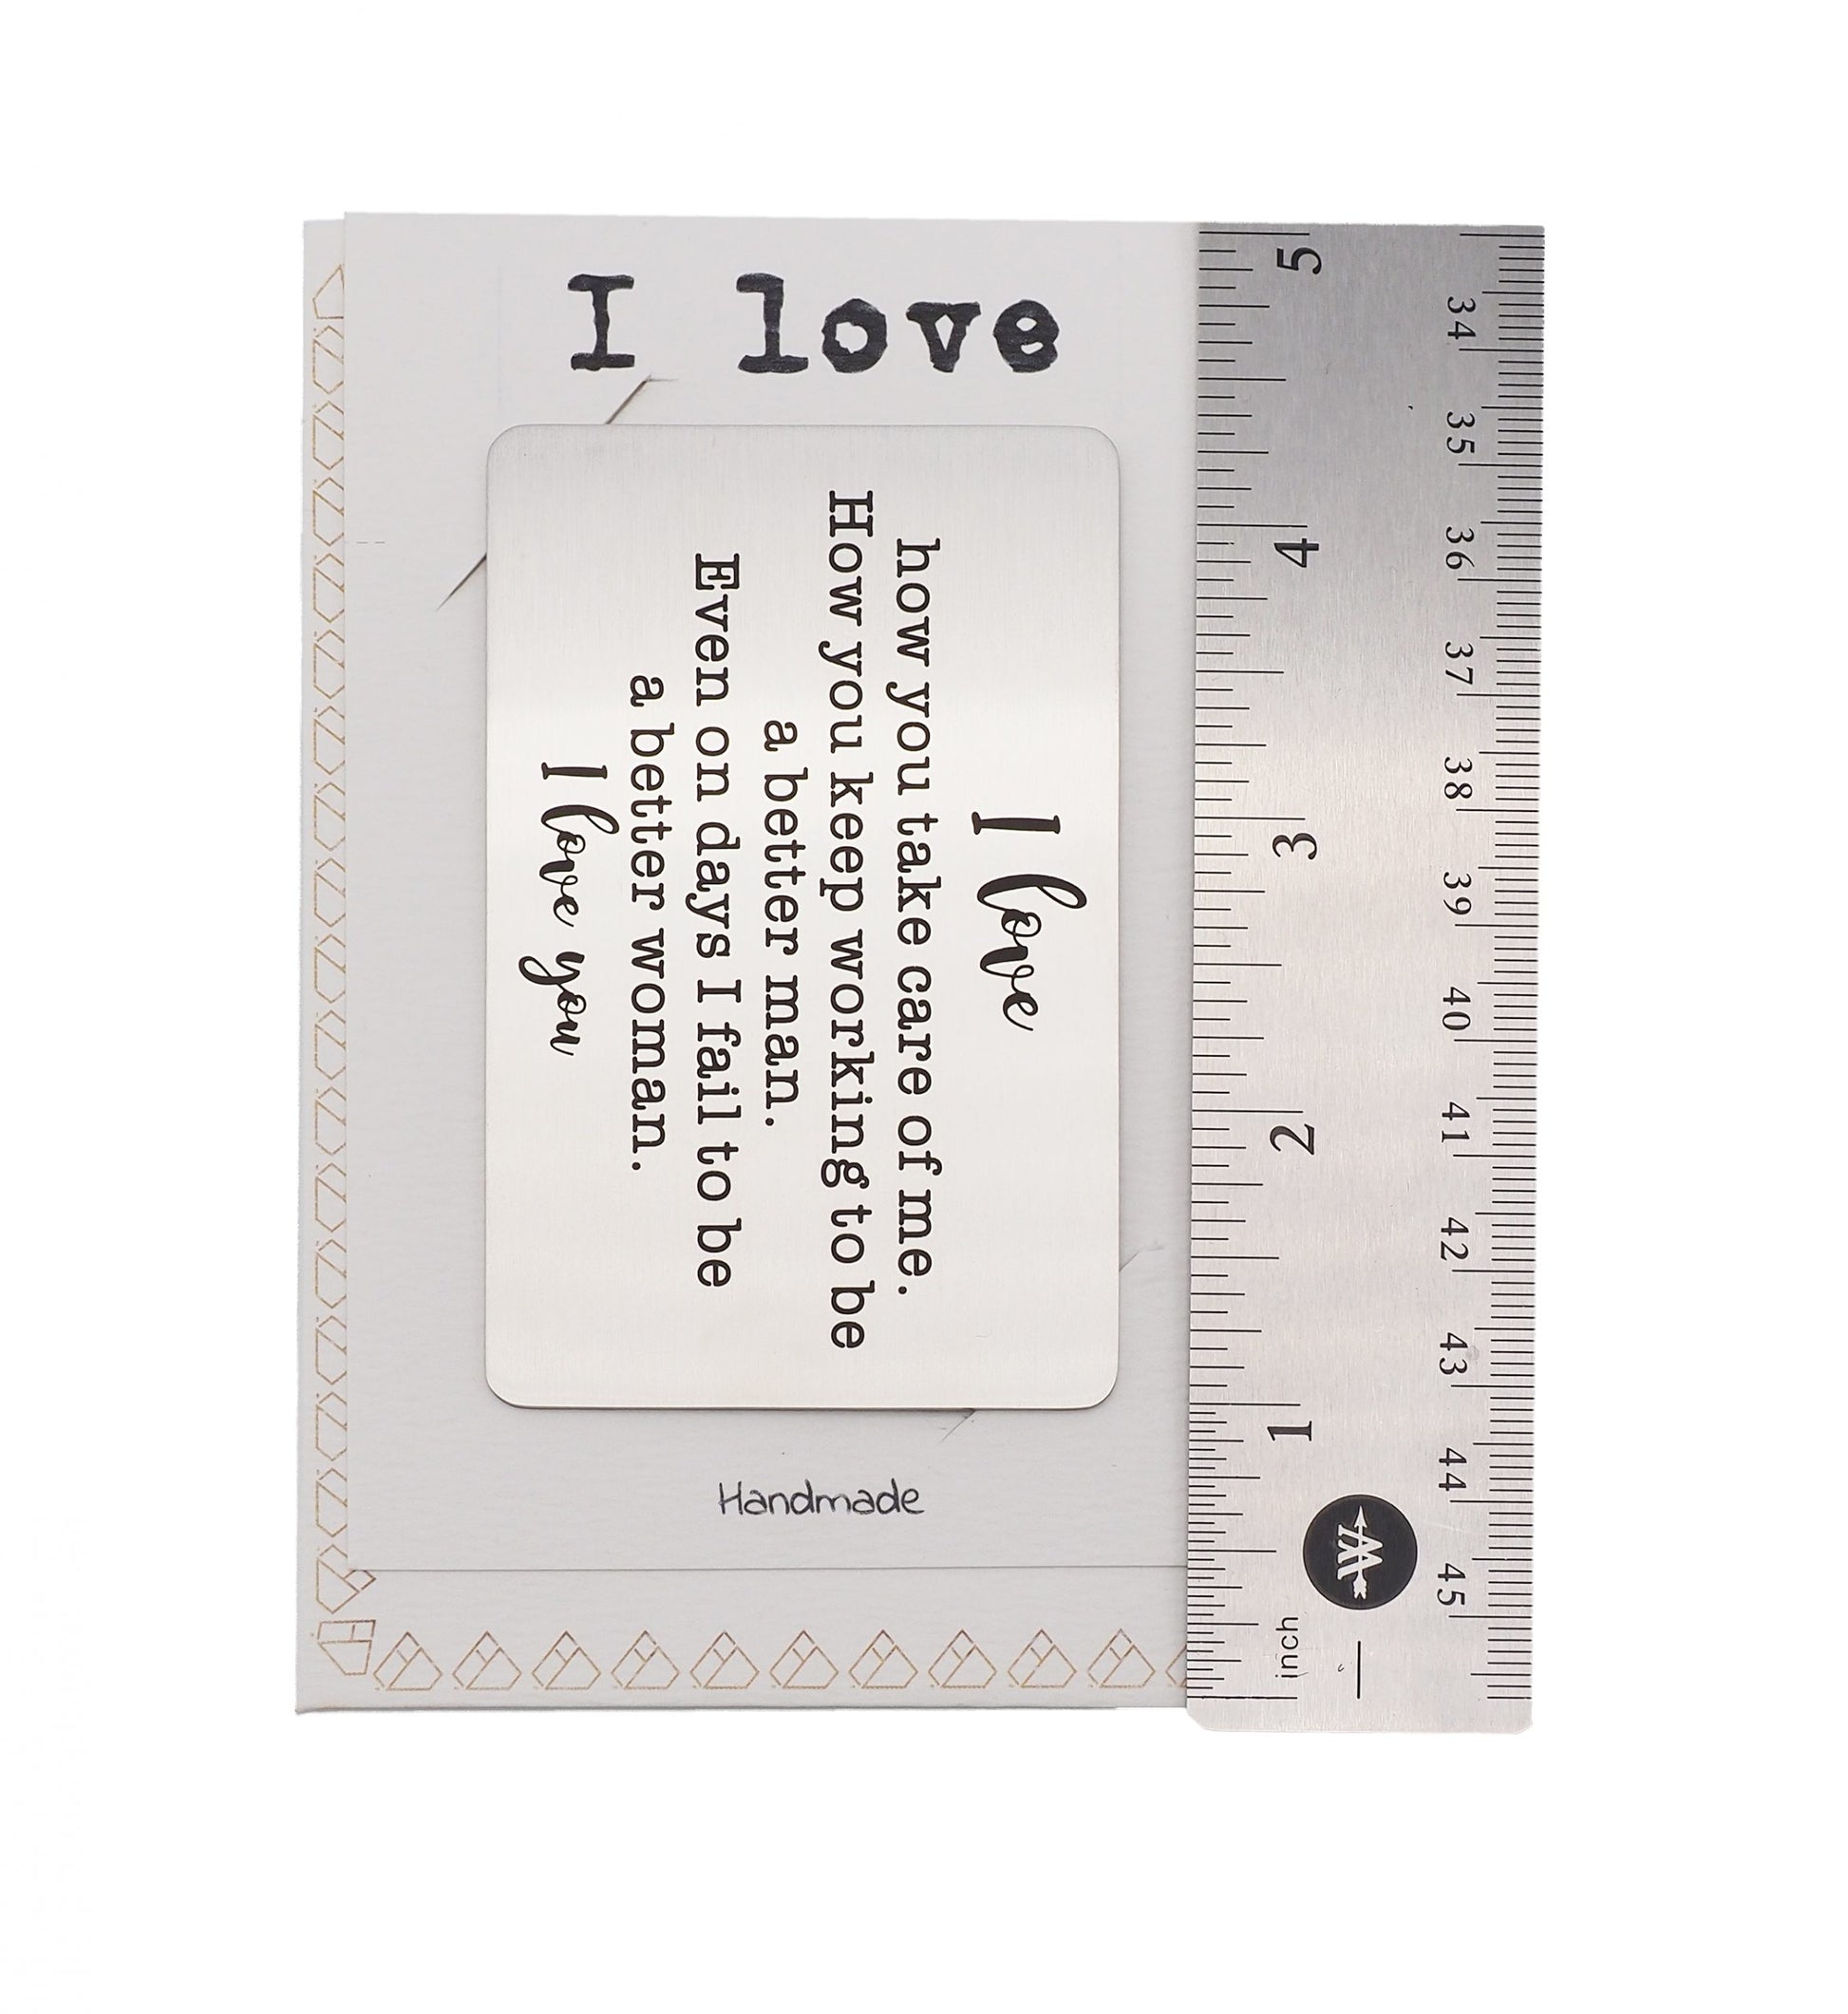 i love you wallet size card - Quinnlyn